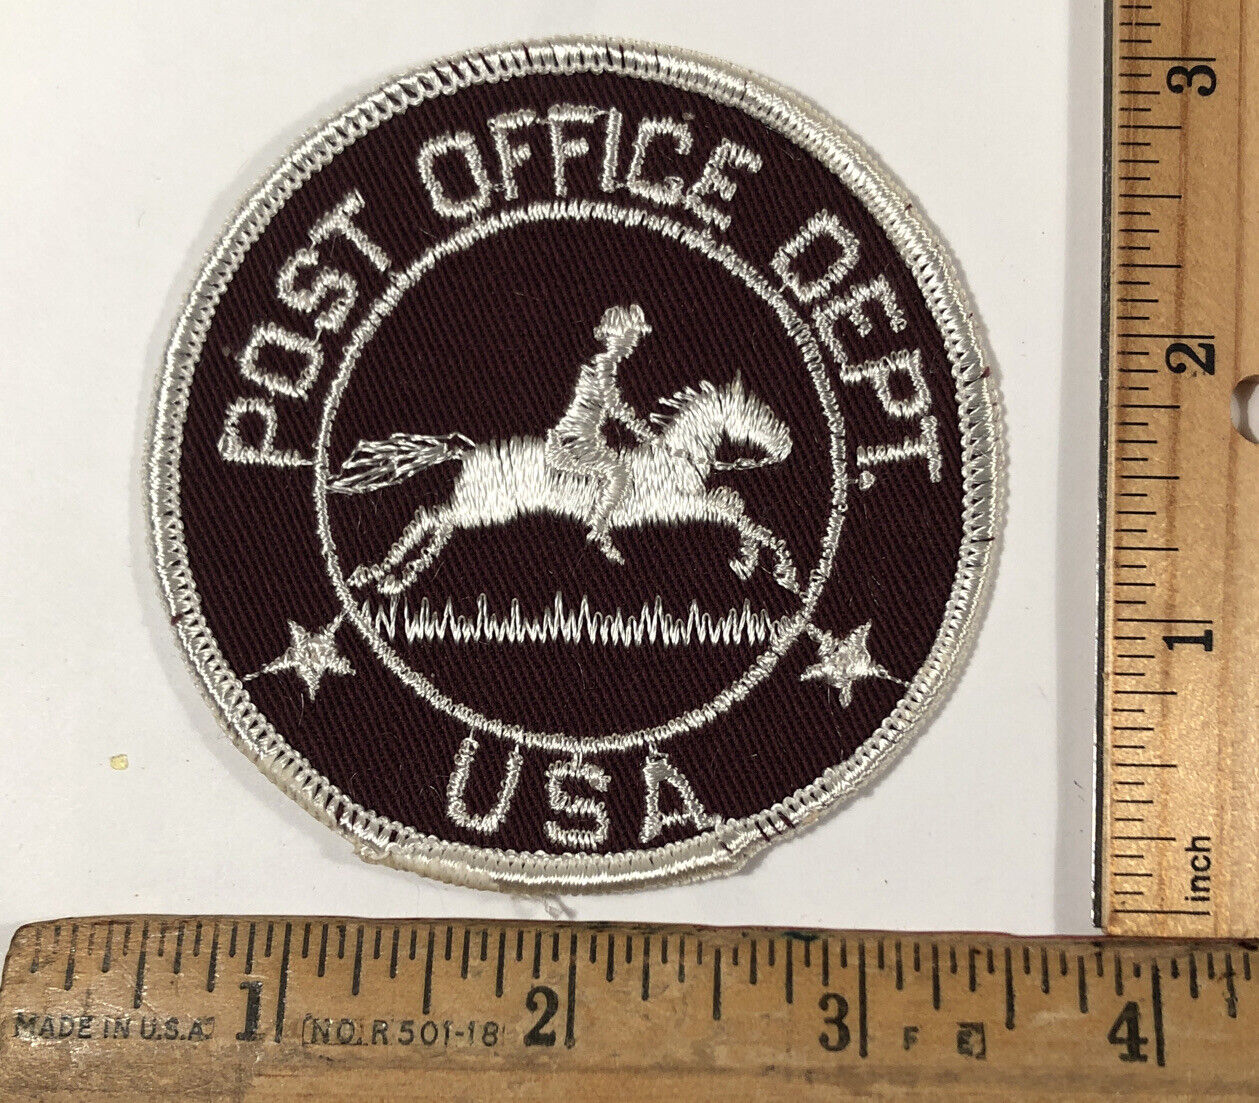 Vintage USPS Post Office Department Pony Express Logo Patch Brown NOS USA Mail